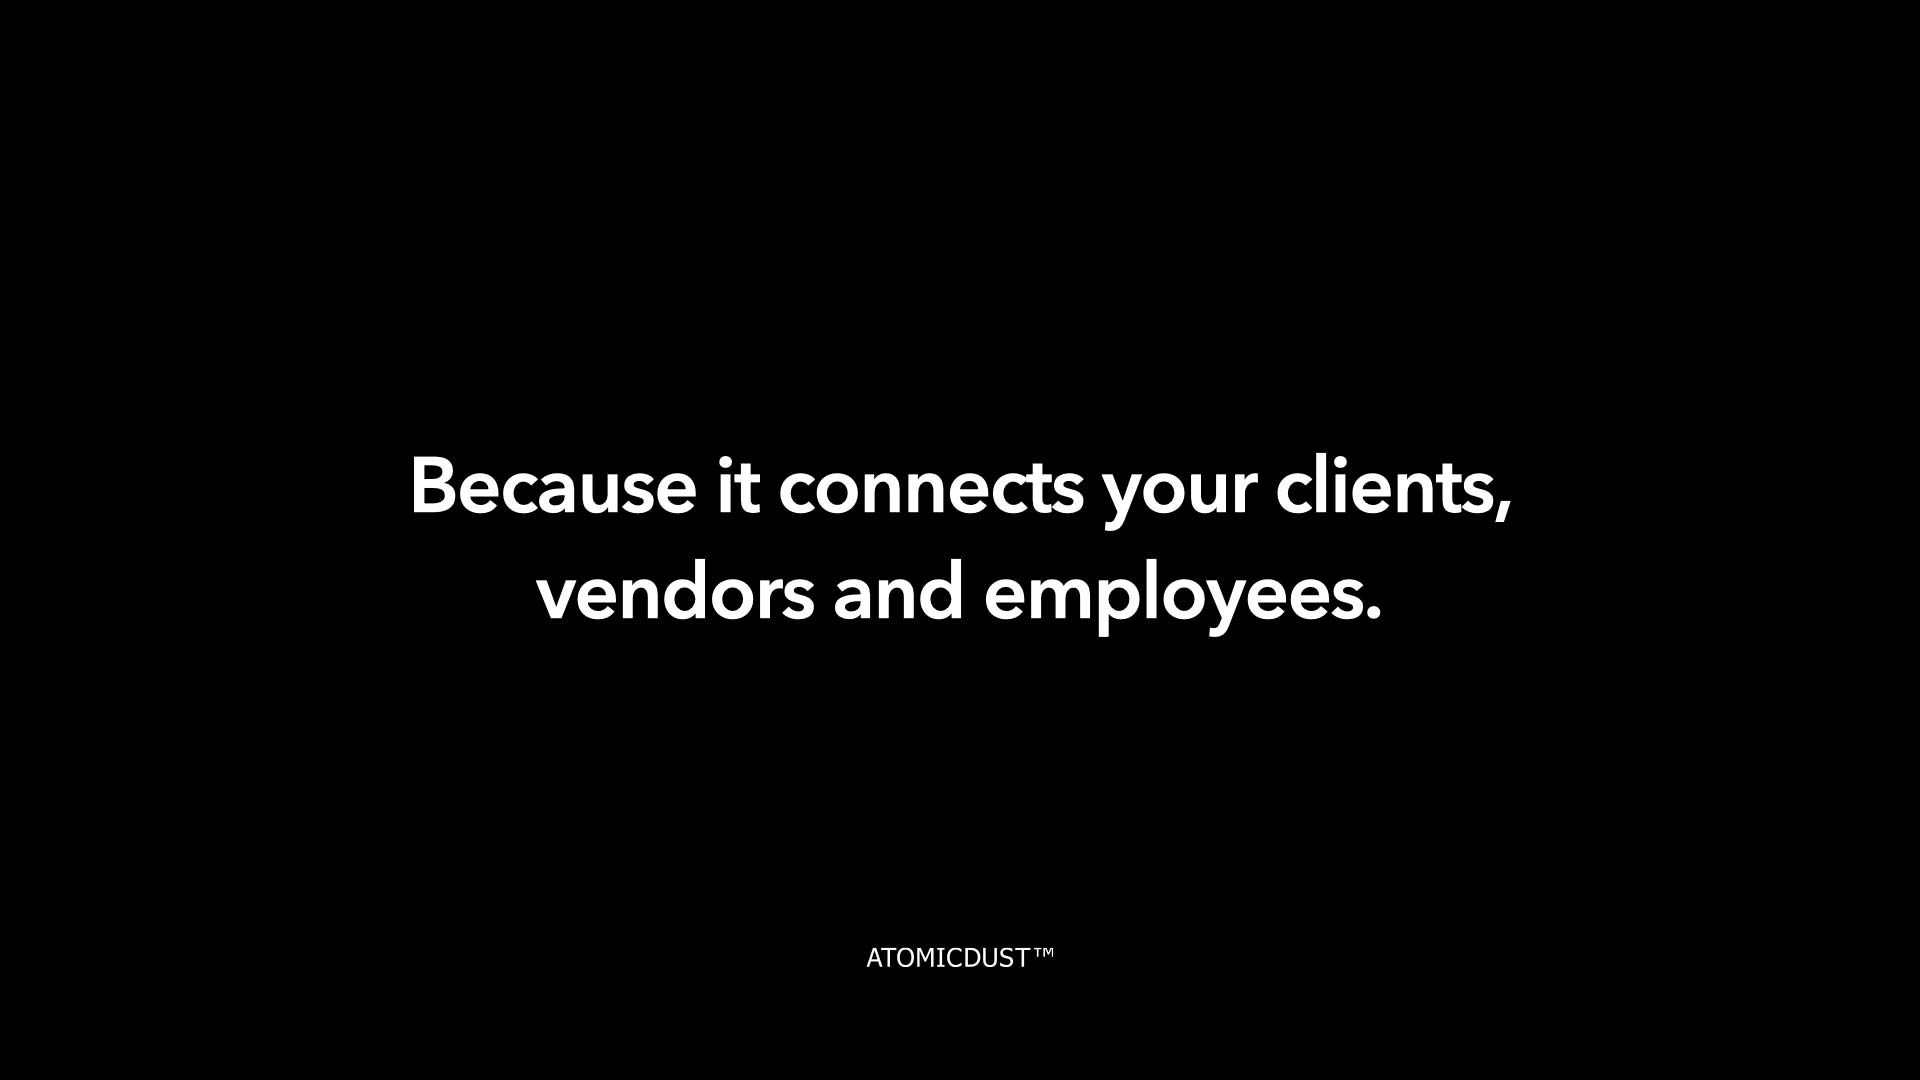 A black rectangle with white type in a B2B presentation that says "Because it connects your clients, vendors and employees."